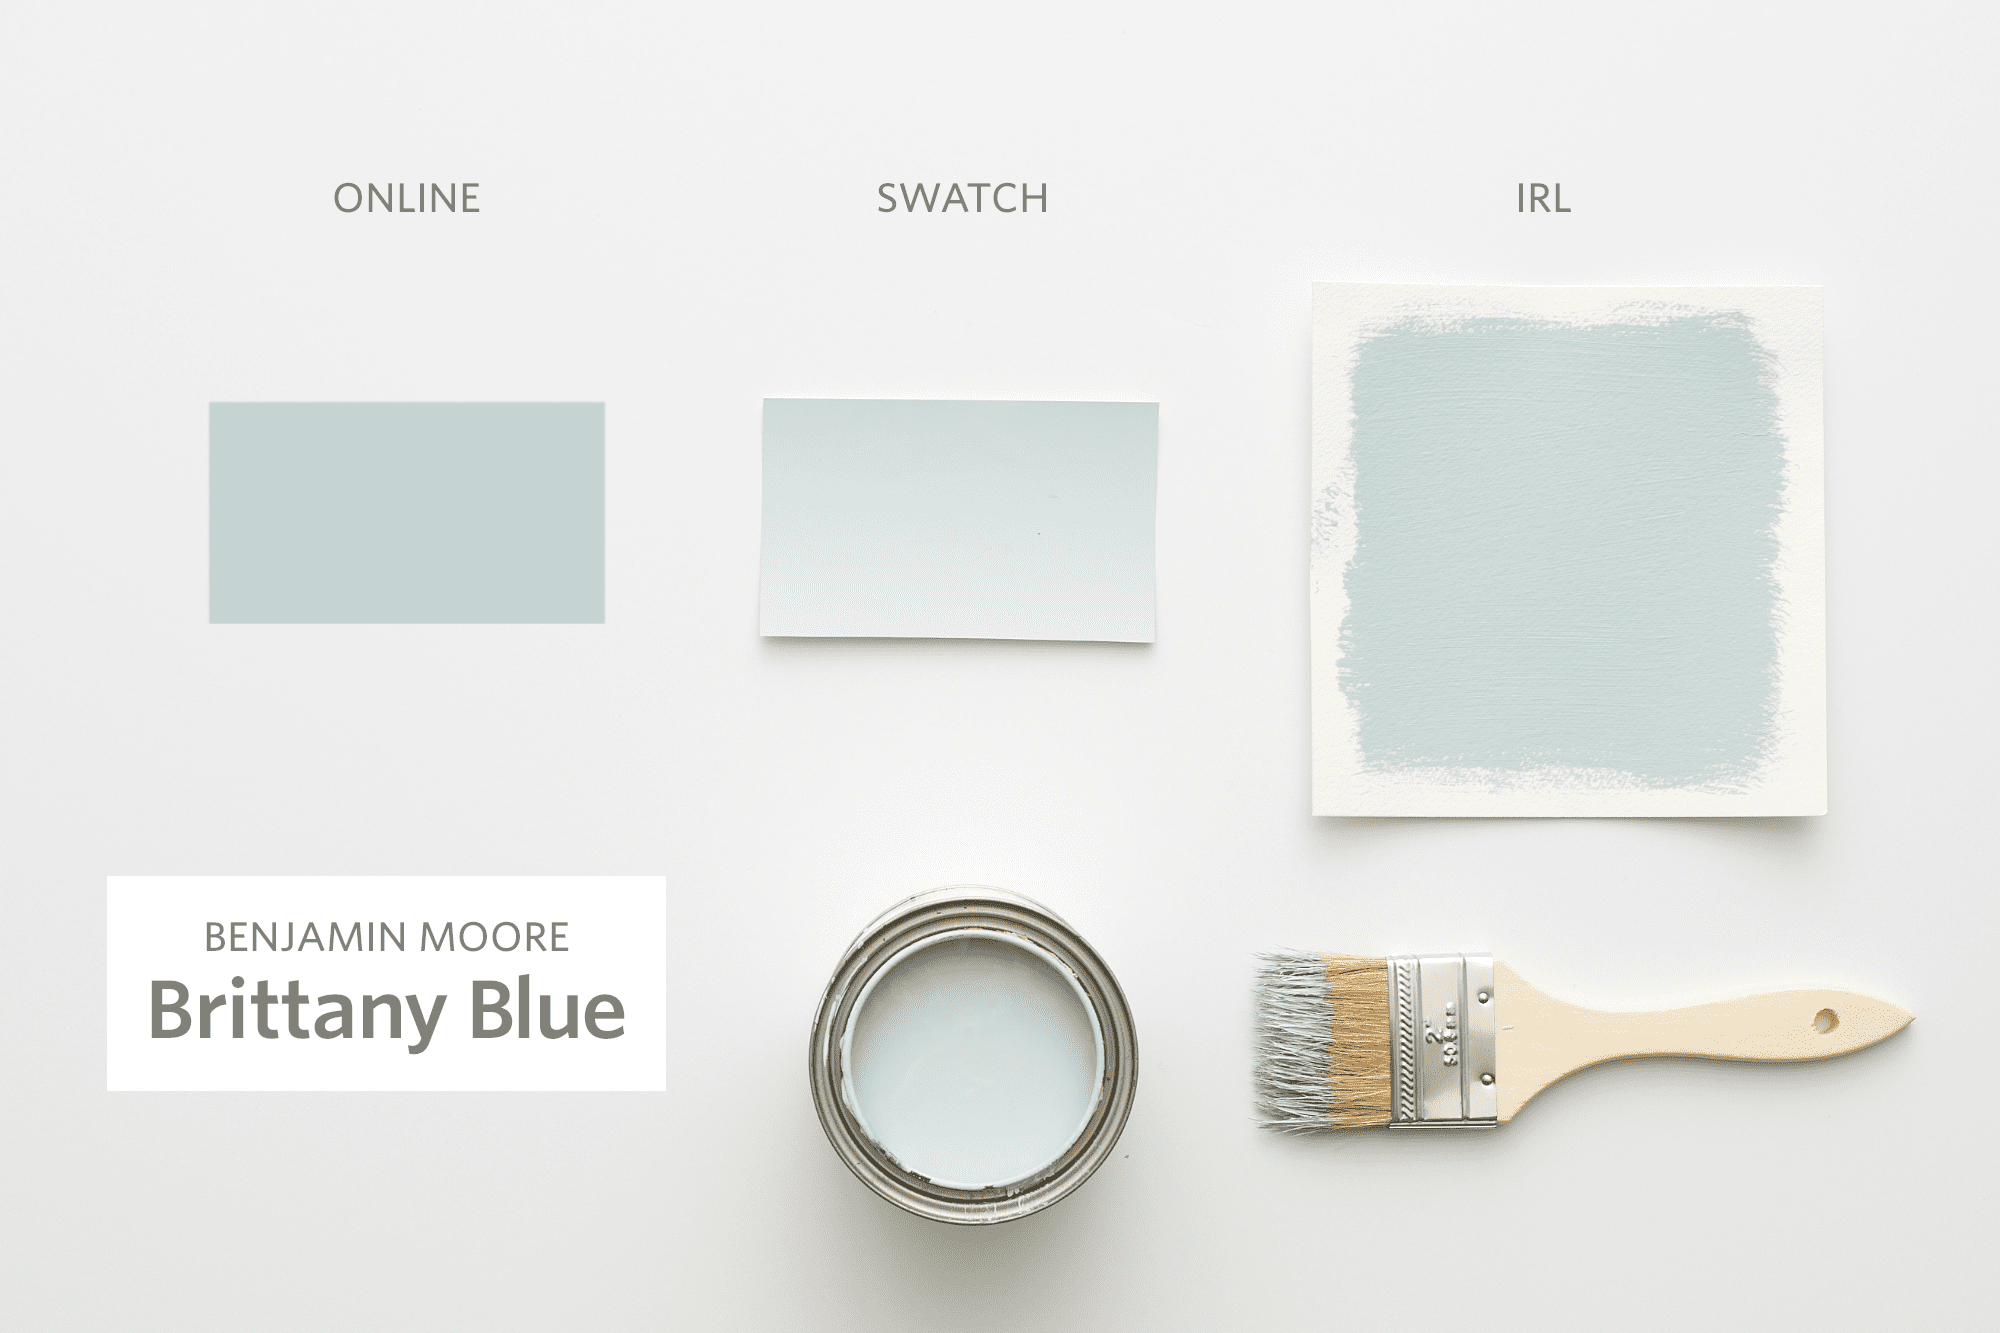 21 Best Blue Paint Colors For Interior Walls Apartment Therapy